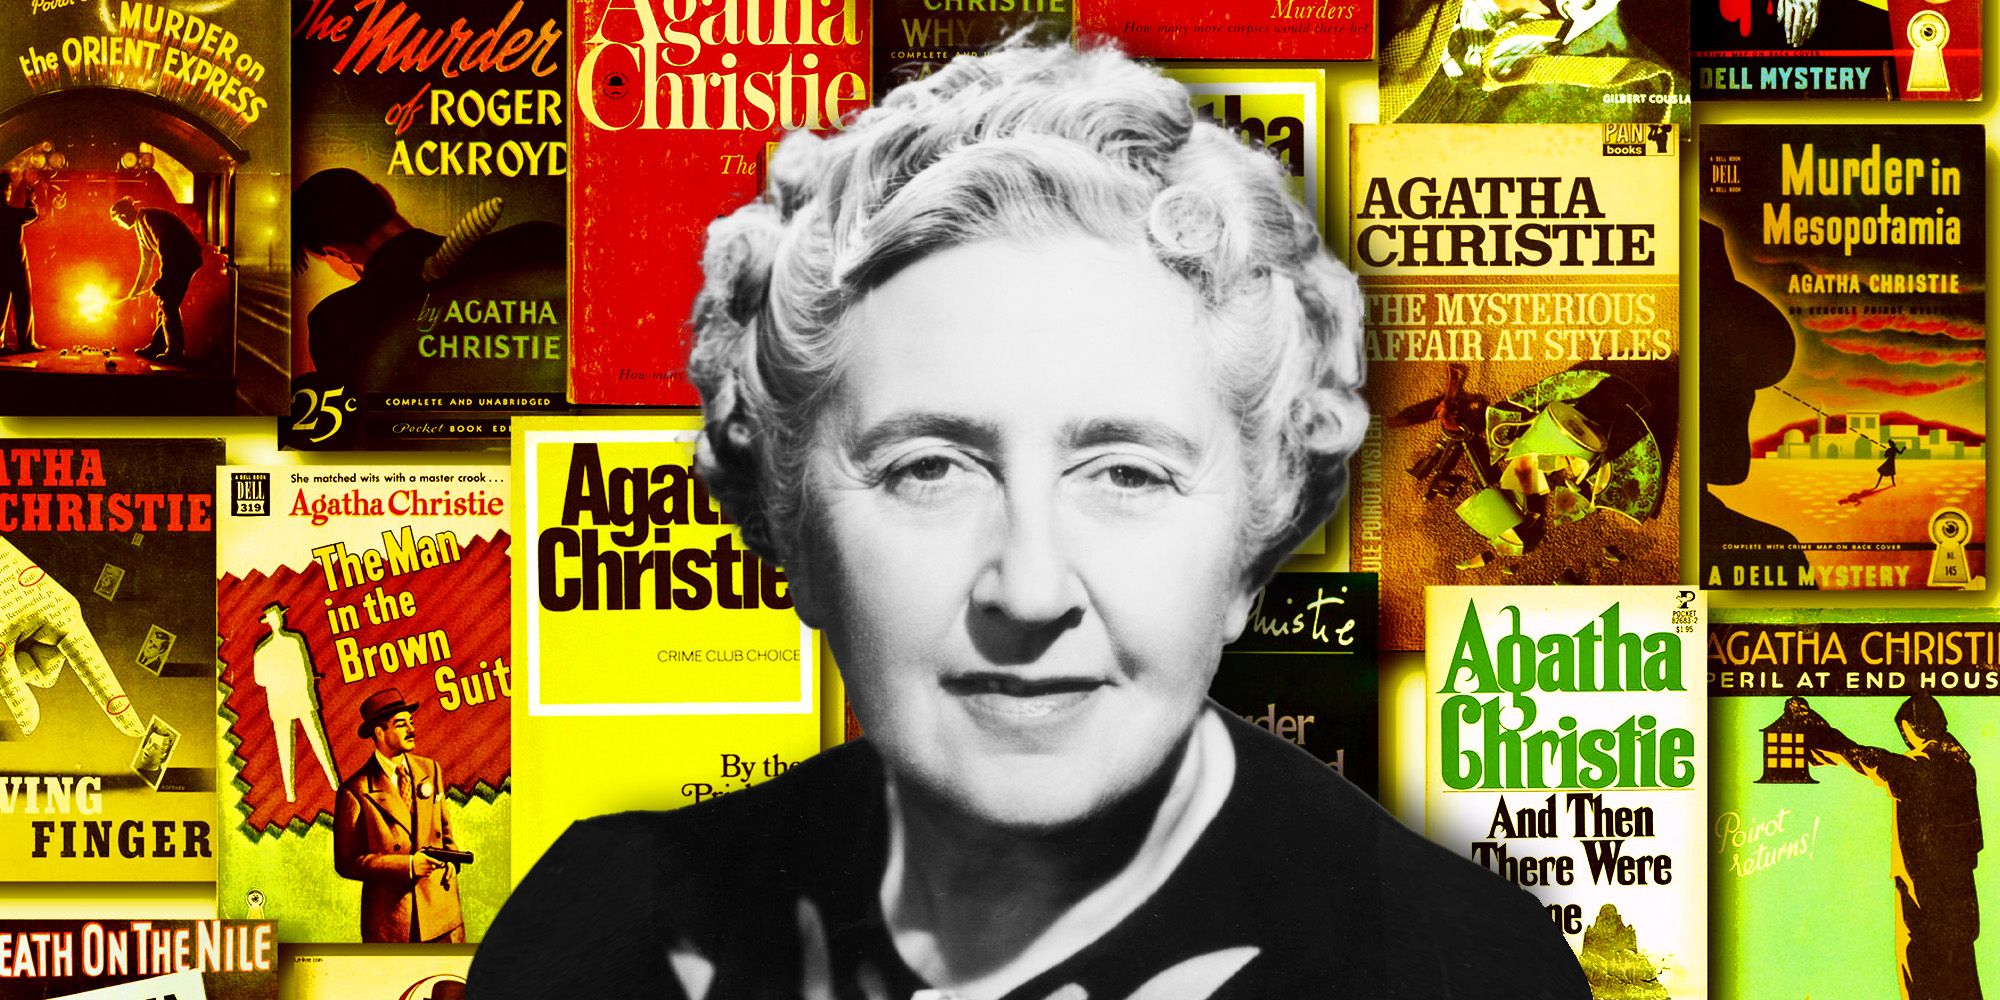 A black-and-white image of Agatha Christie overtop a background of her novels